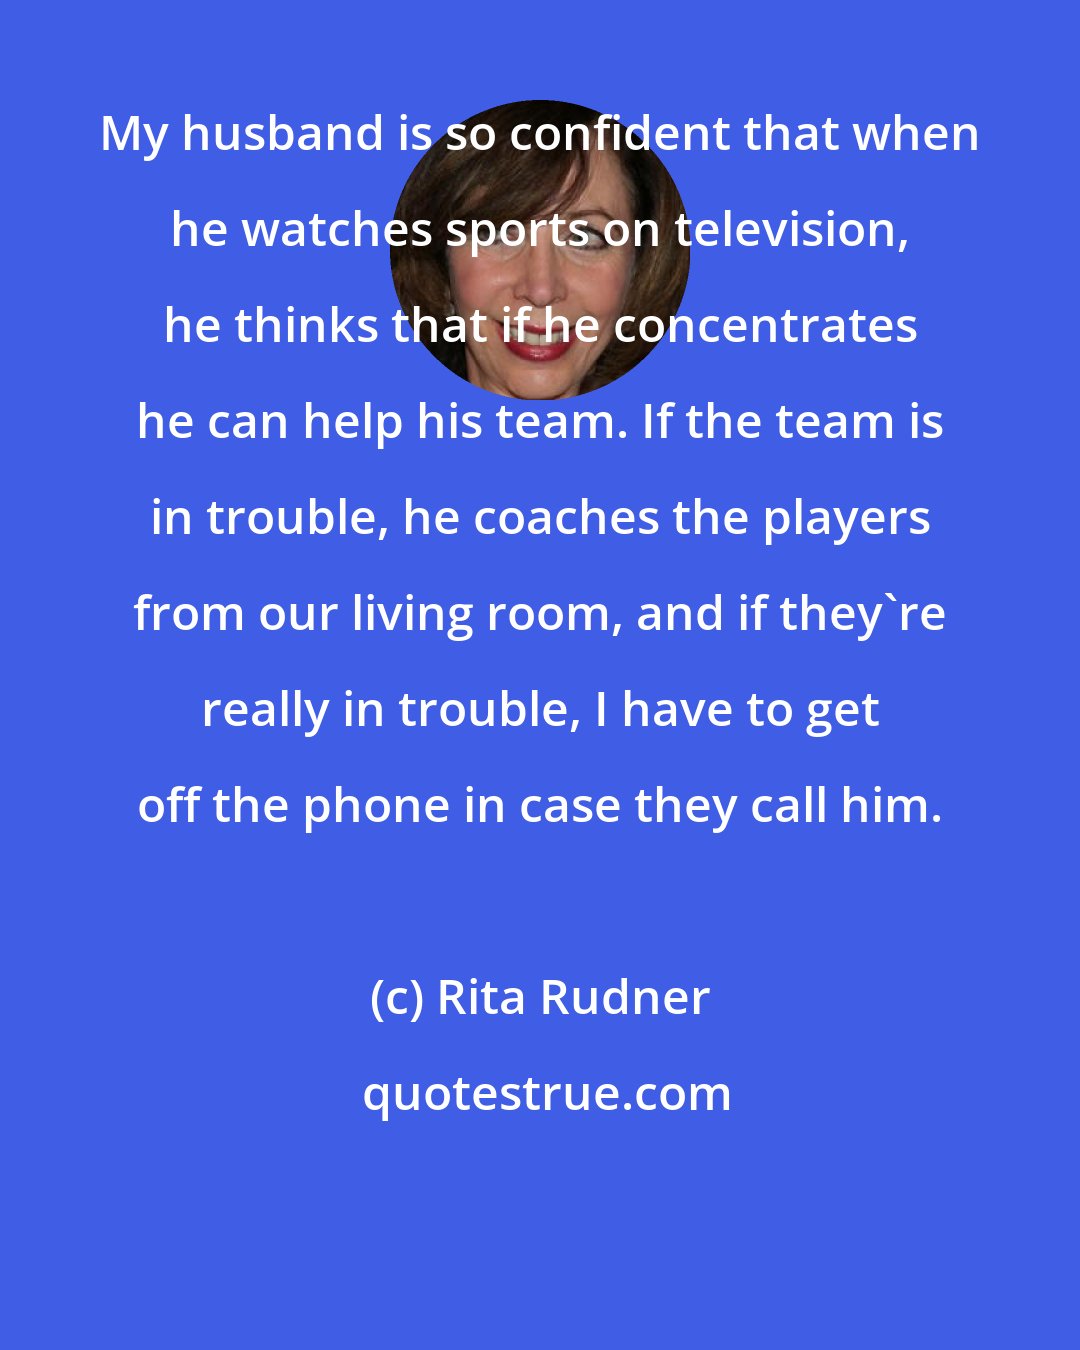 Rita Rudner: My husband is so confident that when he watches sports on television, he thinks that if he concentrates he can help his team. If the team is in trouble, he coaches the players from our living room, and if they're really in trouble, I have to get off the phone in case they call him.